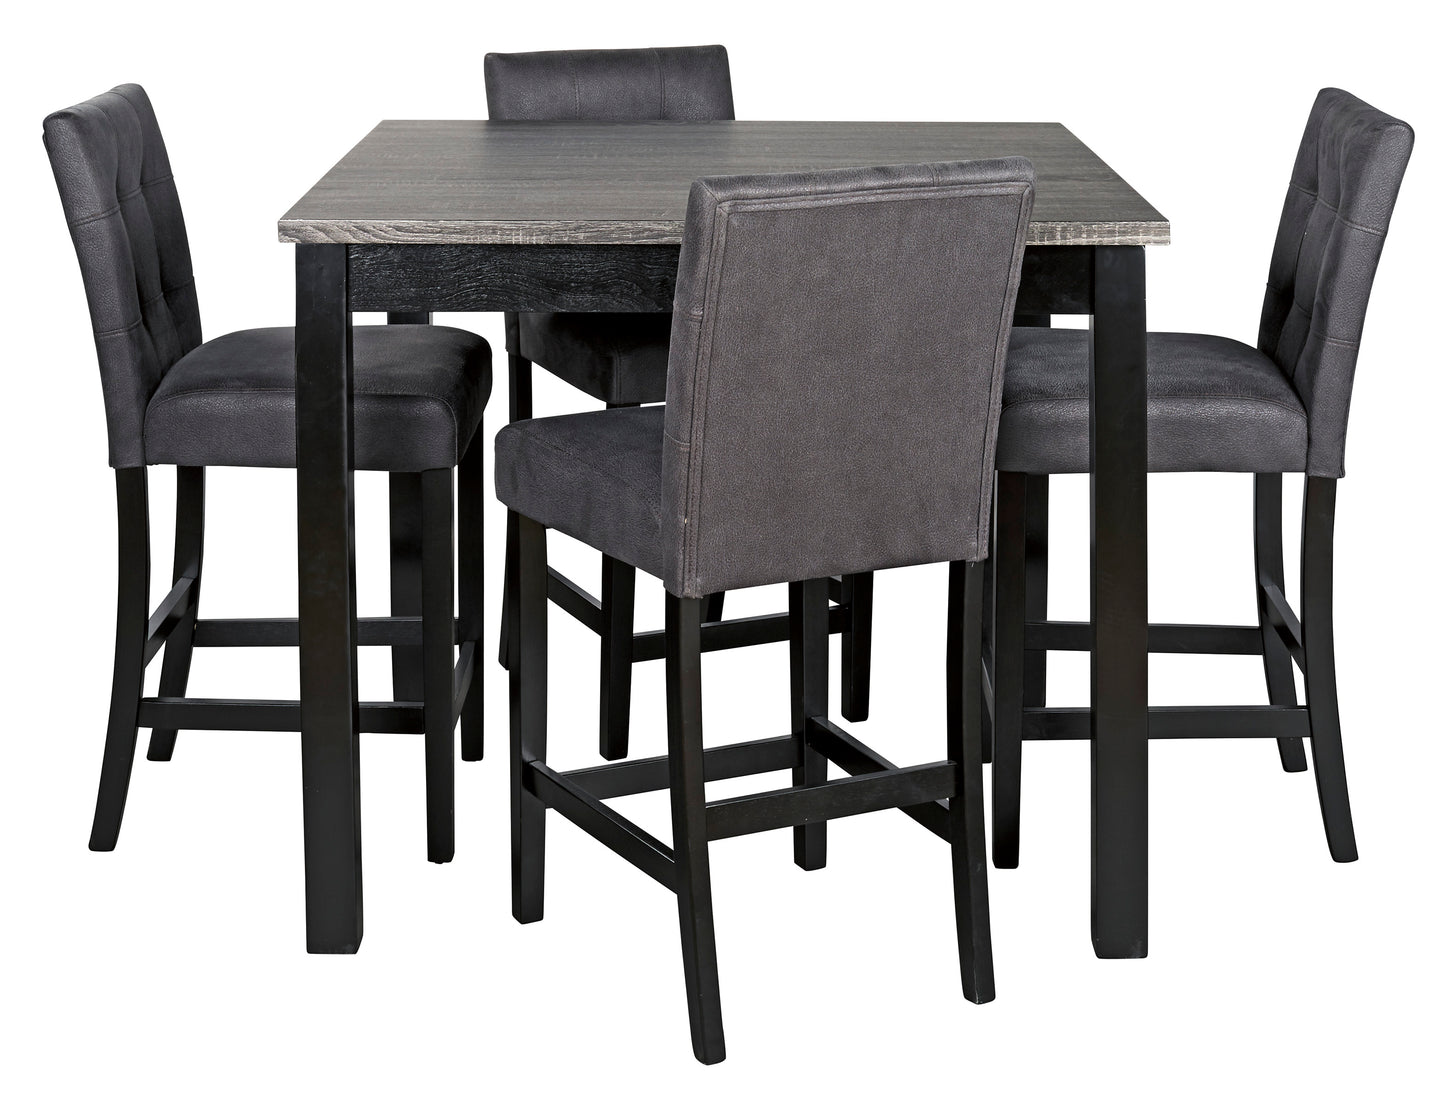 Garvine Two-tone Counter Height Dining Table and Bar Stools (Set of 5) | D161-223